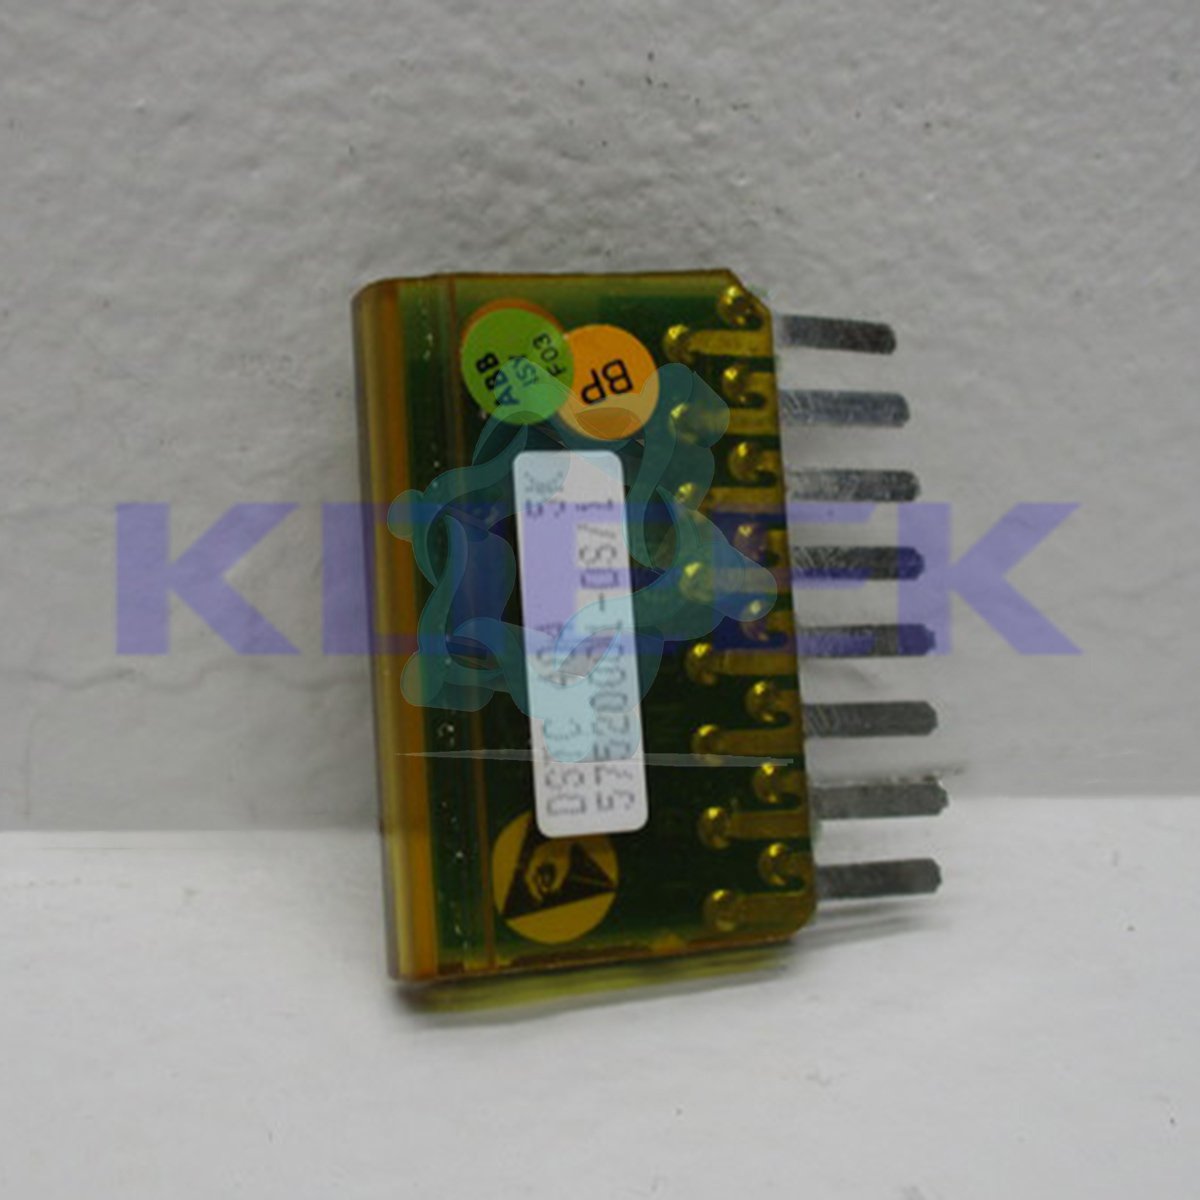 57520001-DS KOEED 101-200, 80%, ABB, import_2020_10_10_031751, Other